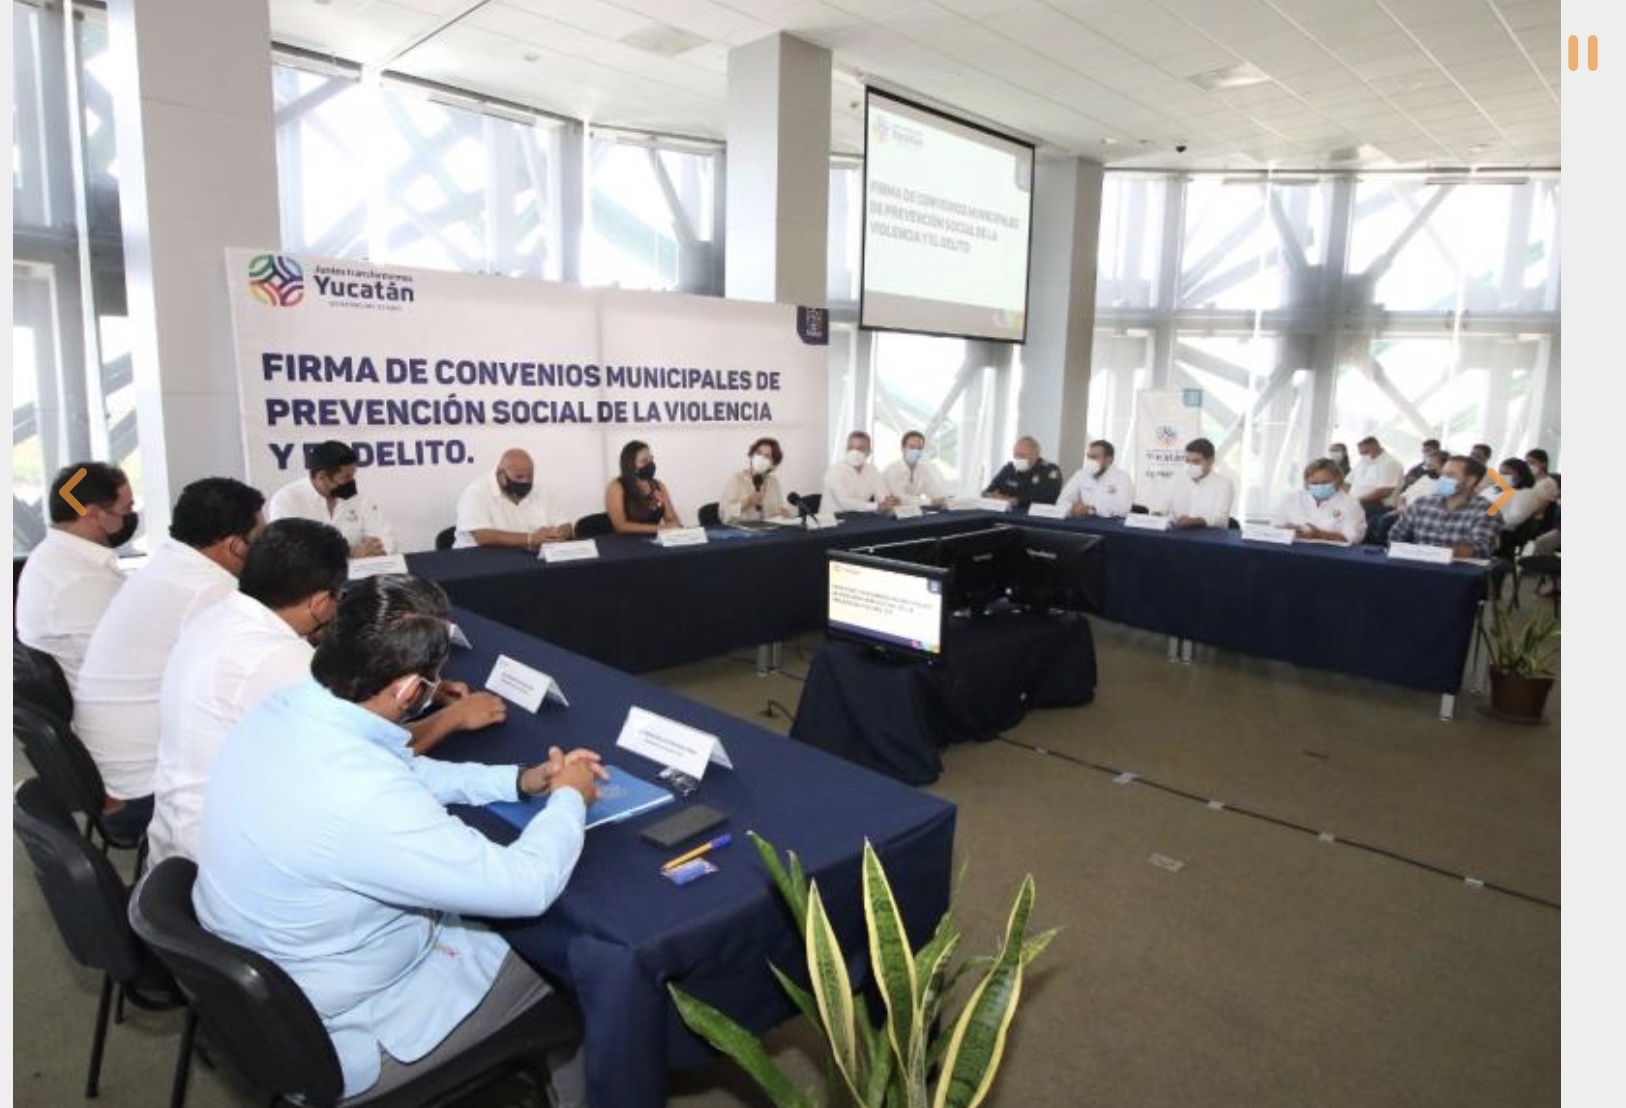 Yucatan: State Government and 10 Municipalities join efforts to prevent violence and crime